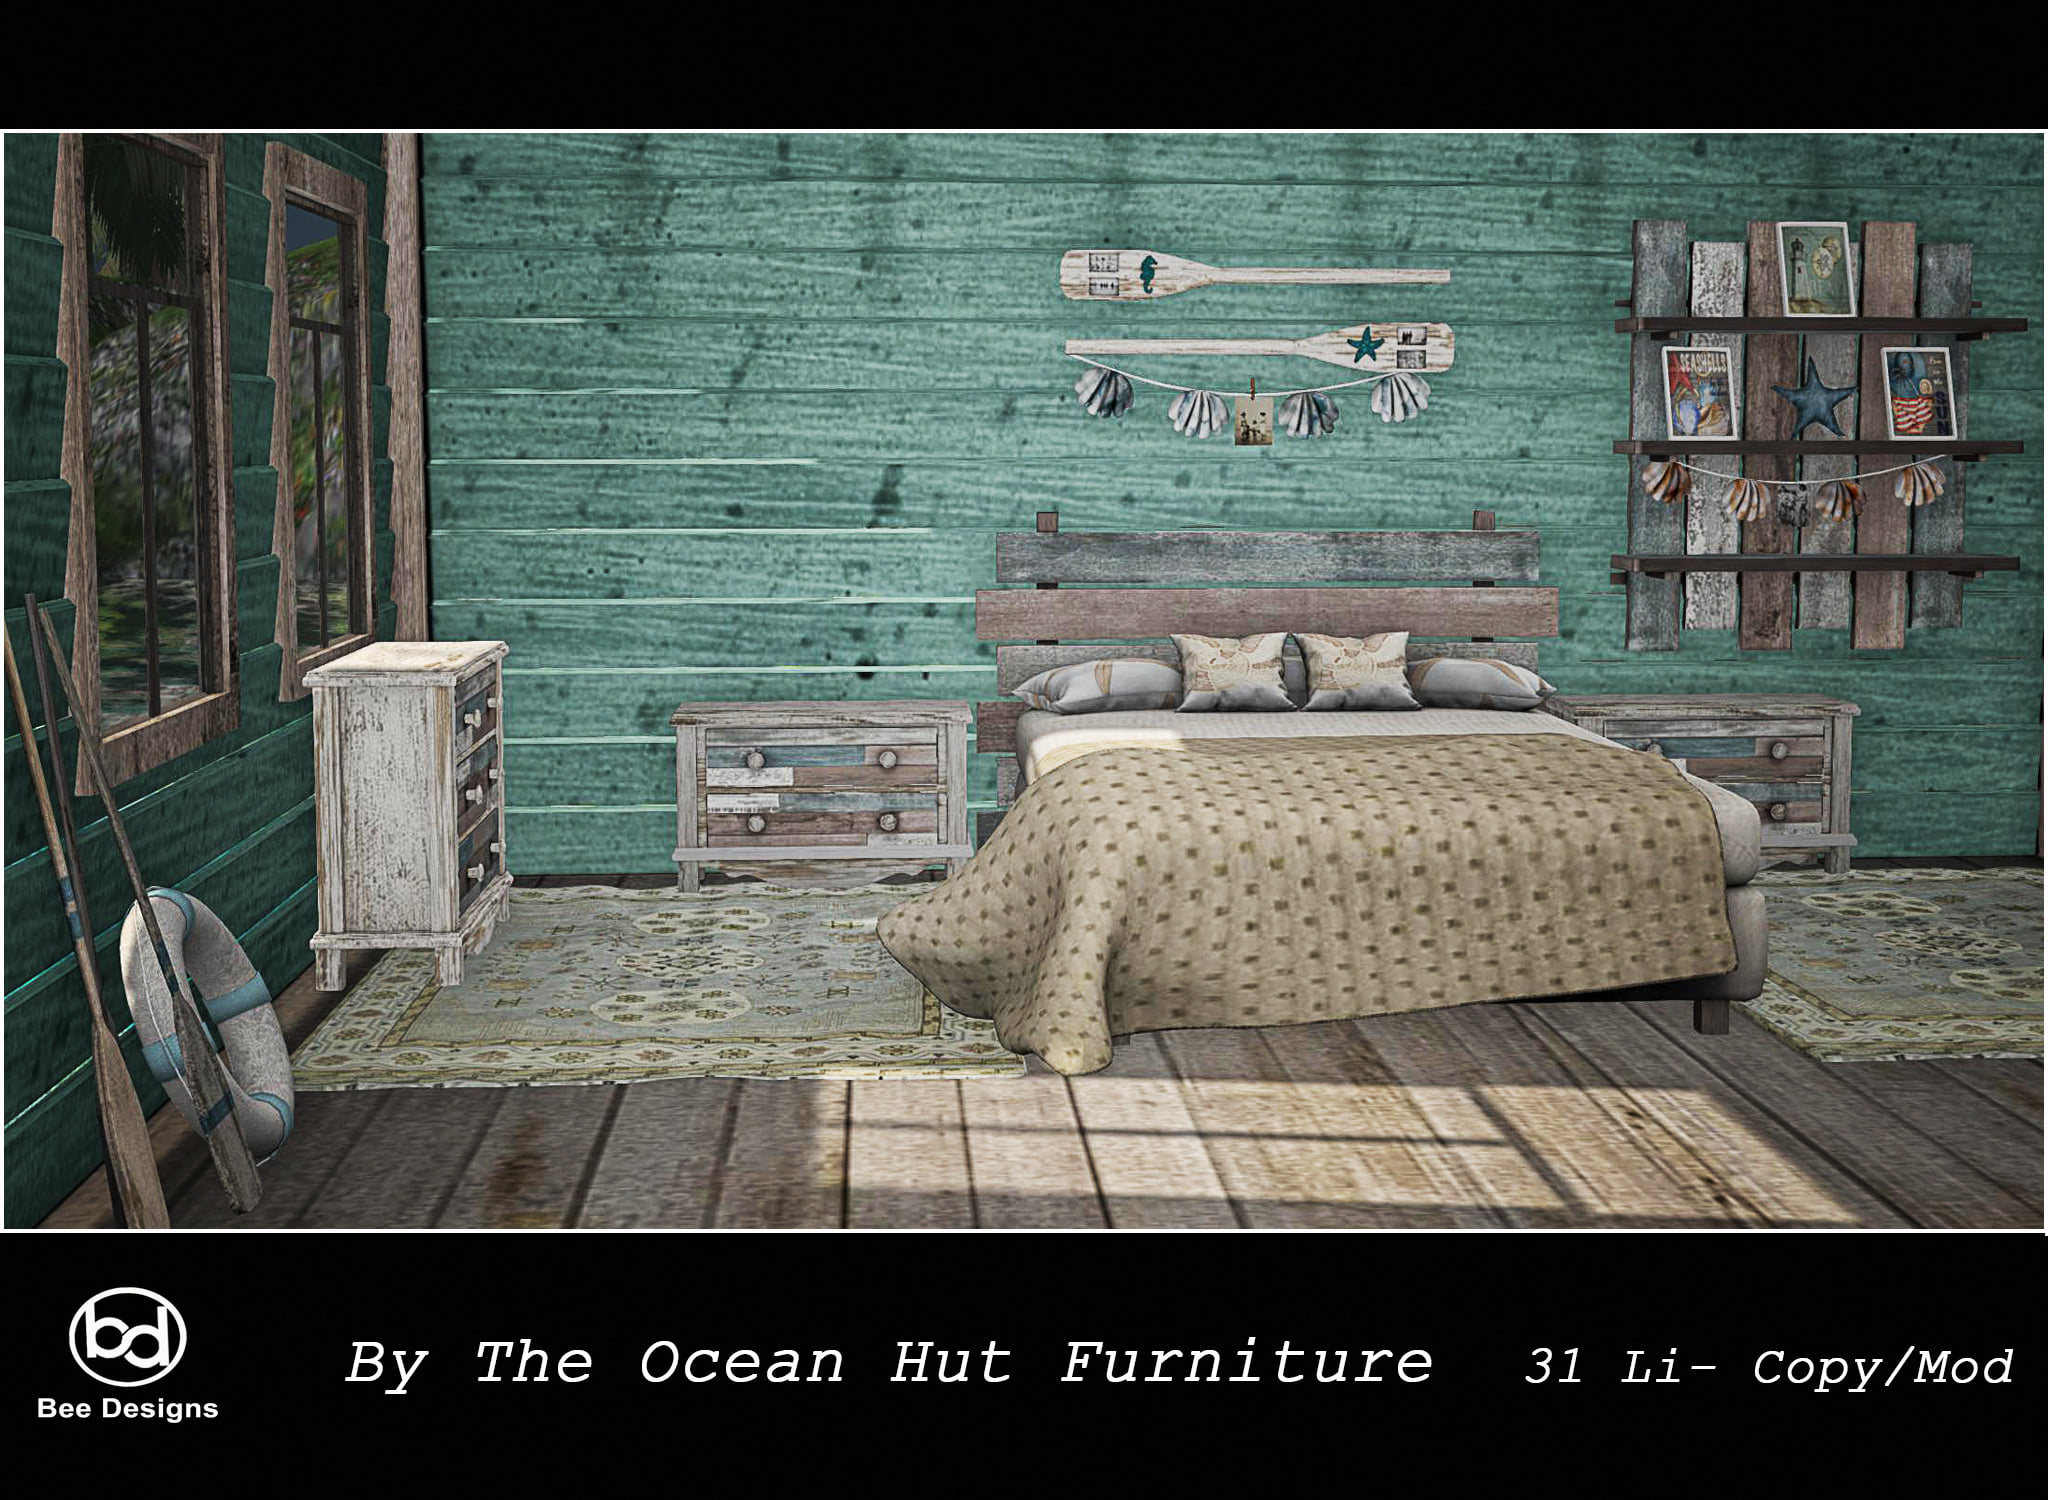 Bee Designs – By The Ocean Hut Furniture